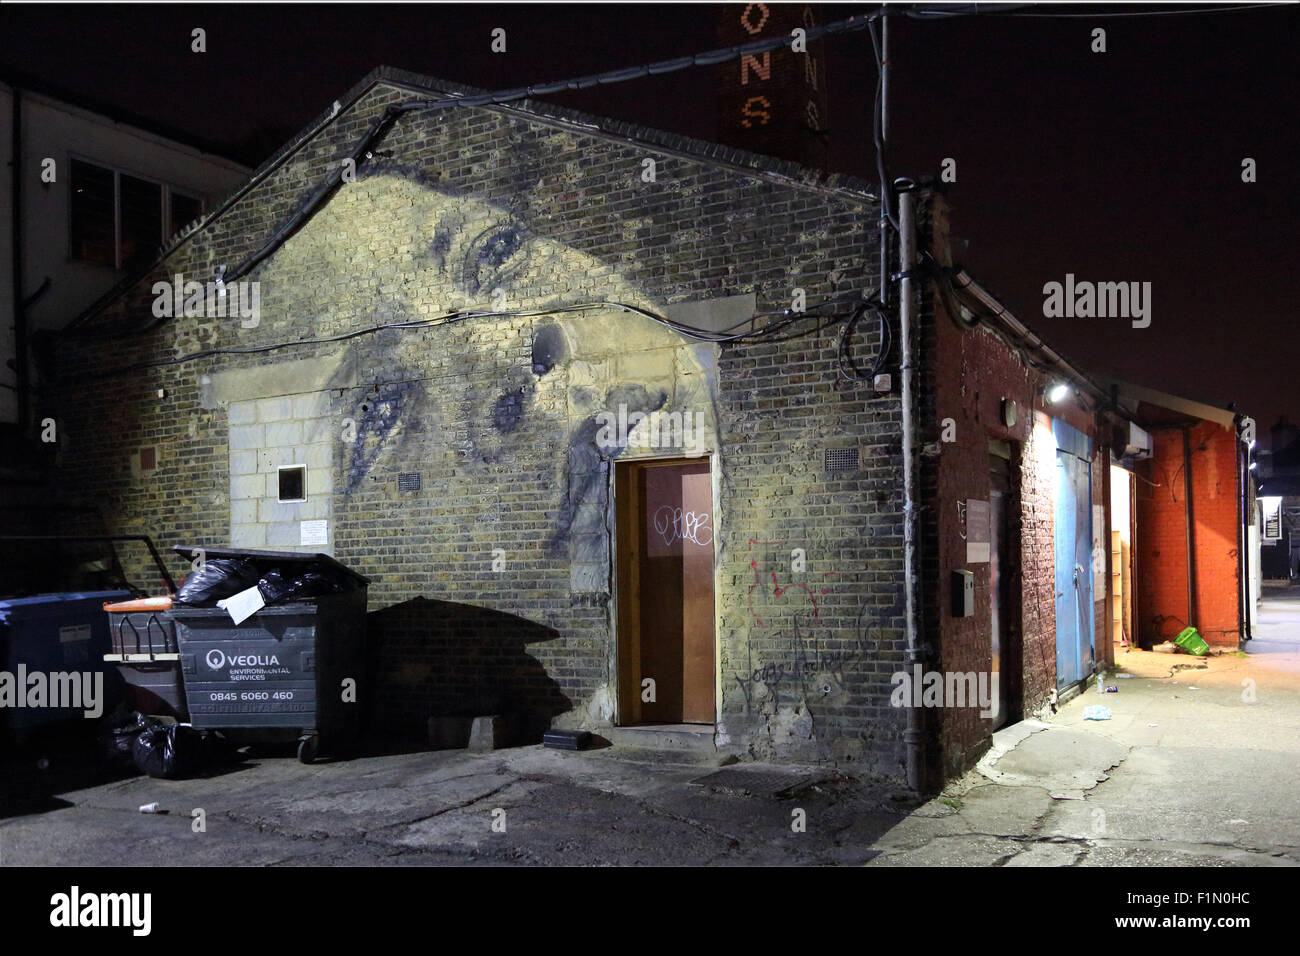 Ghostly face. A mural of a woman's face painted on the gable end of an old industrial building in Peckham, south east London Stock Photo